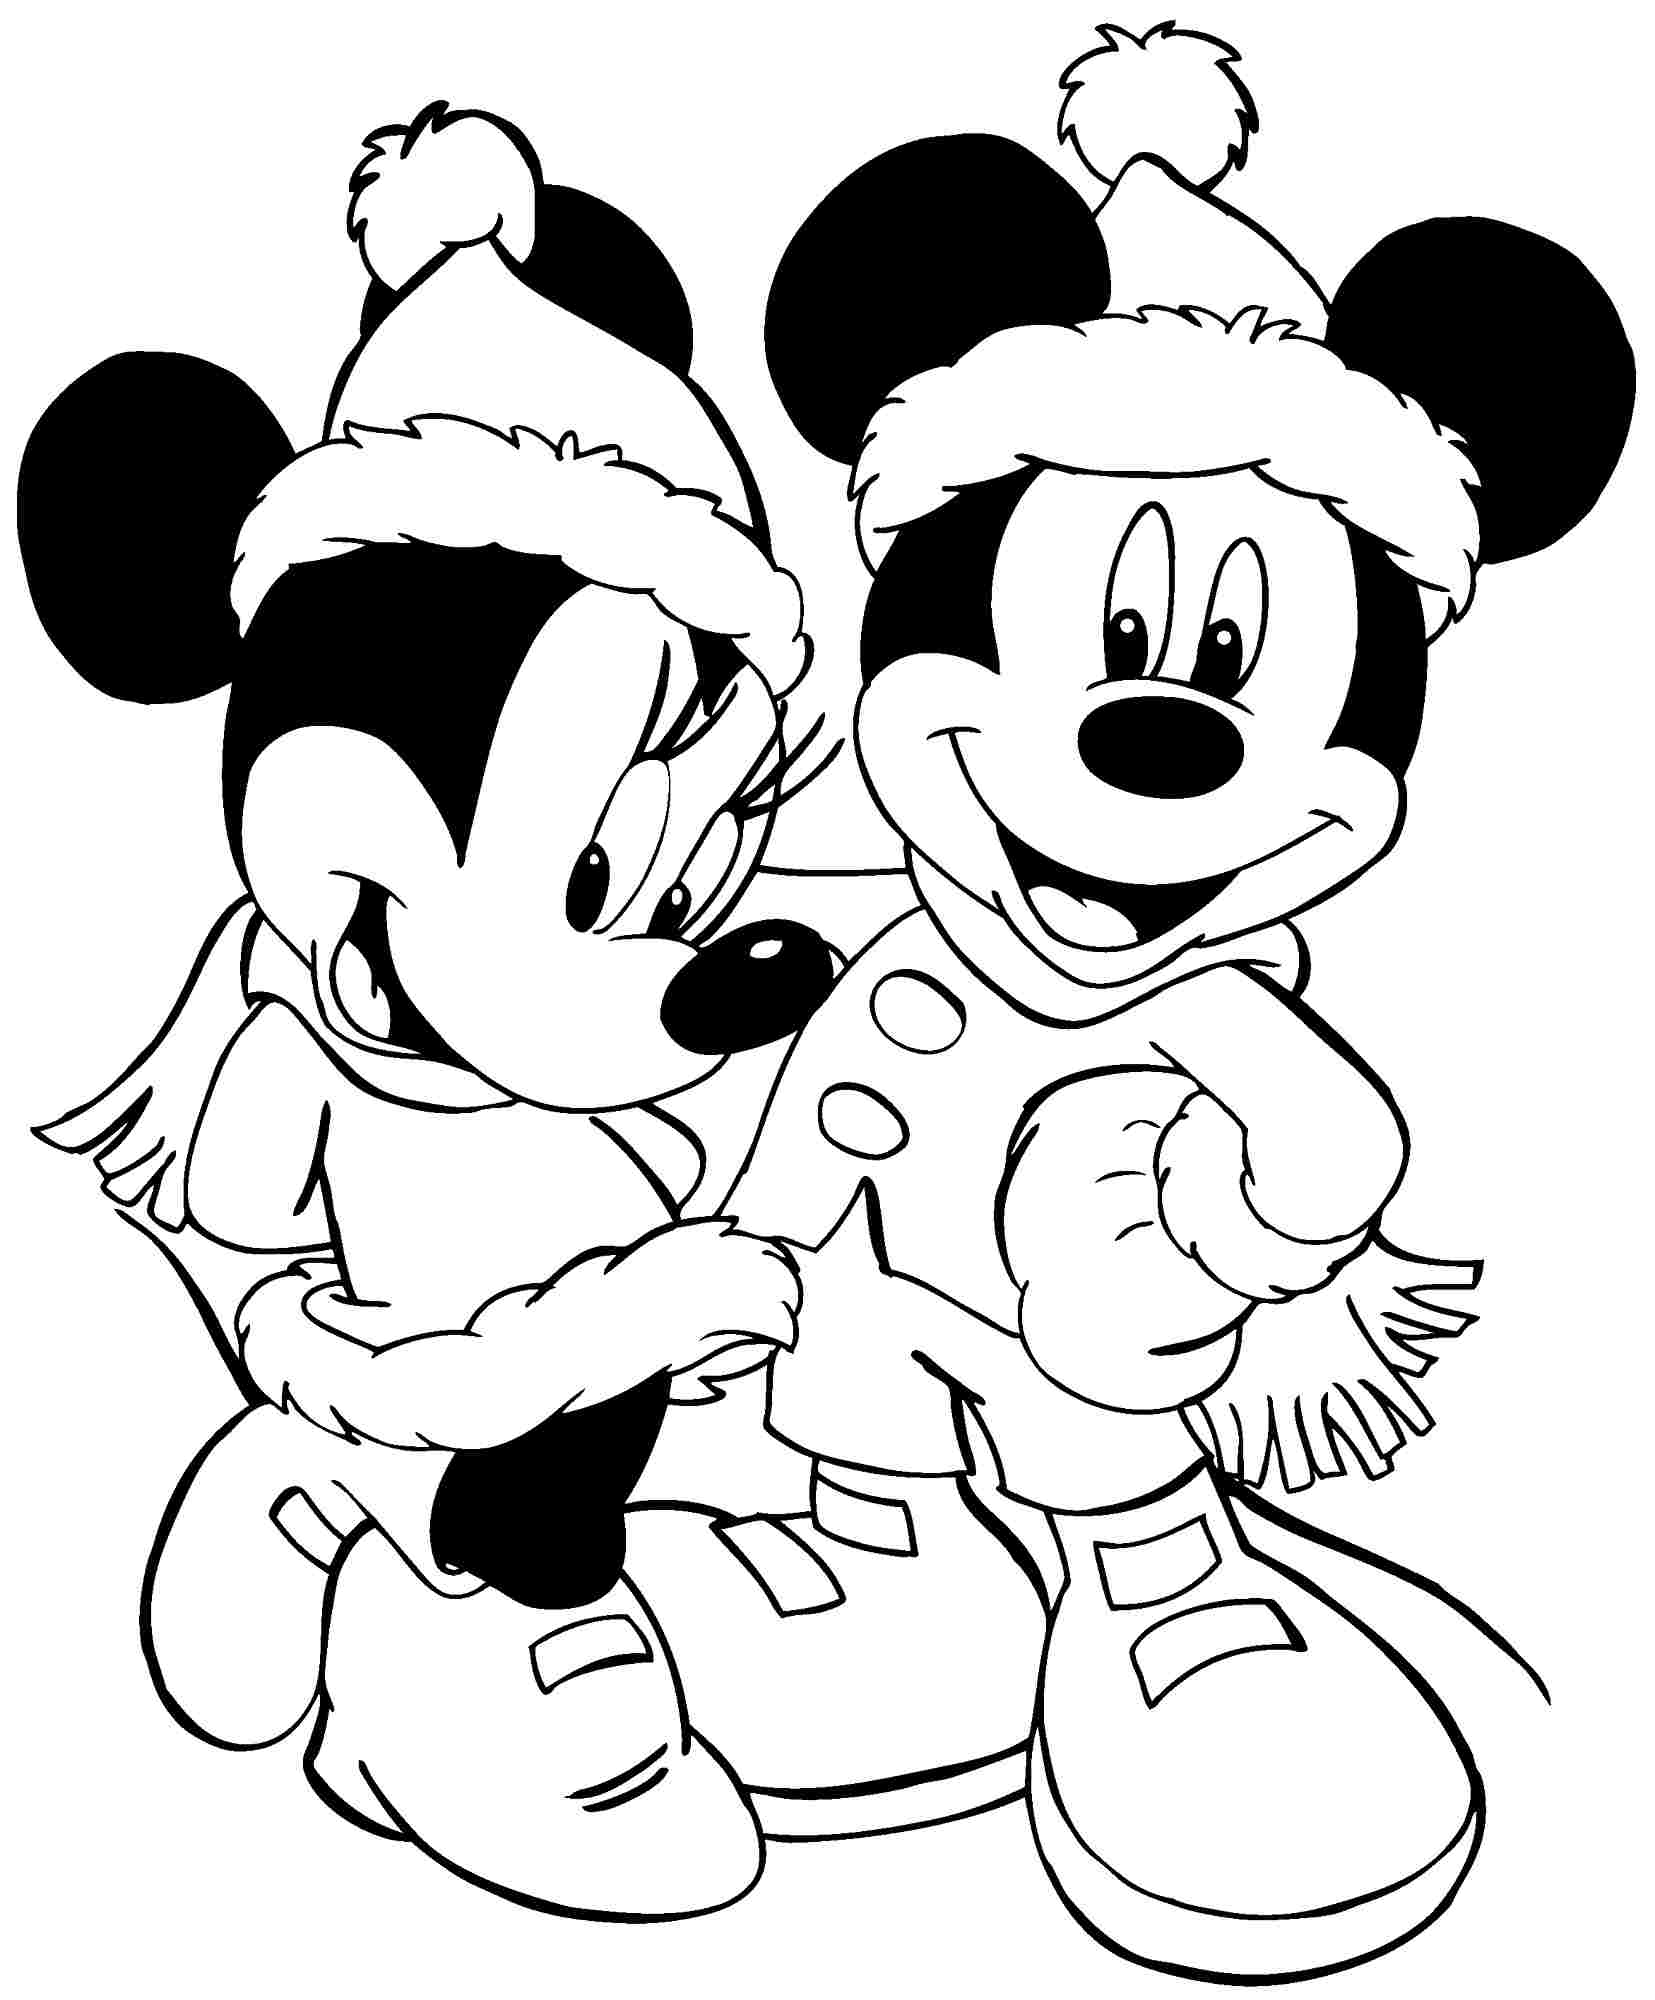 christmas-mickey-mouse-drawing-at-getdrawings-free-download